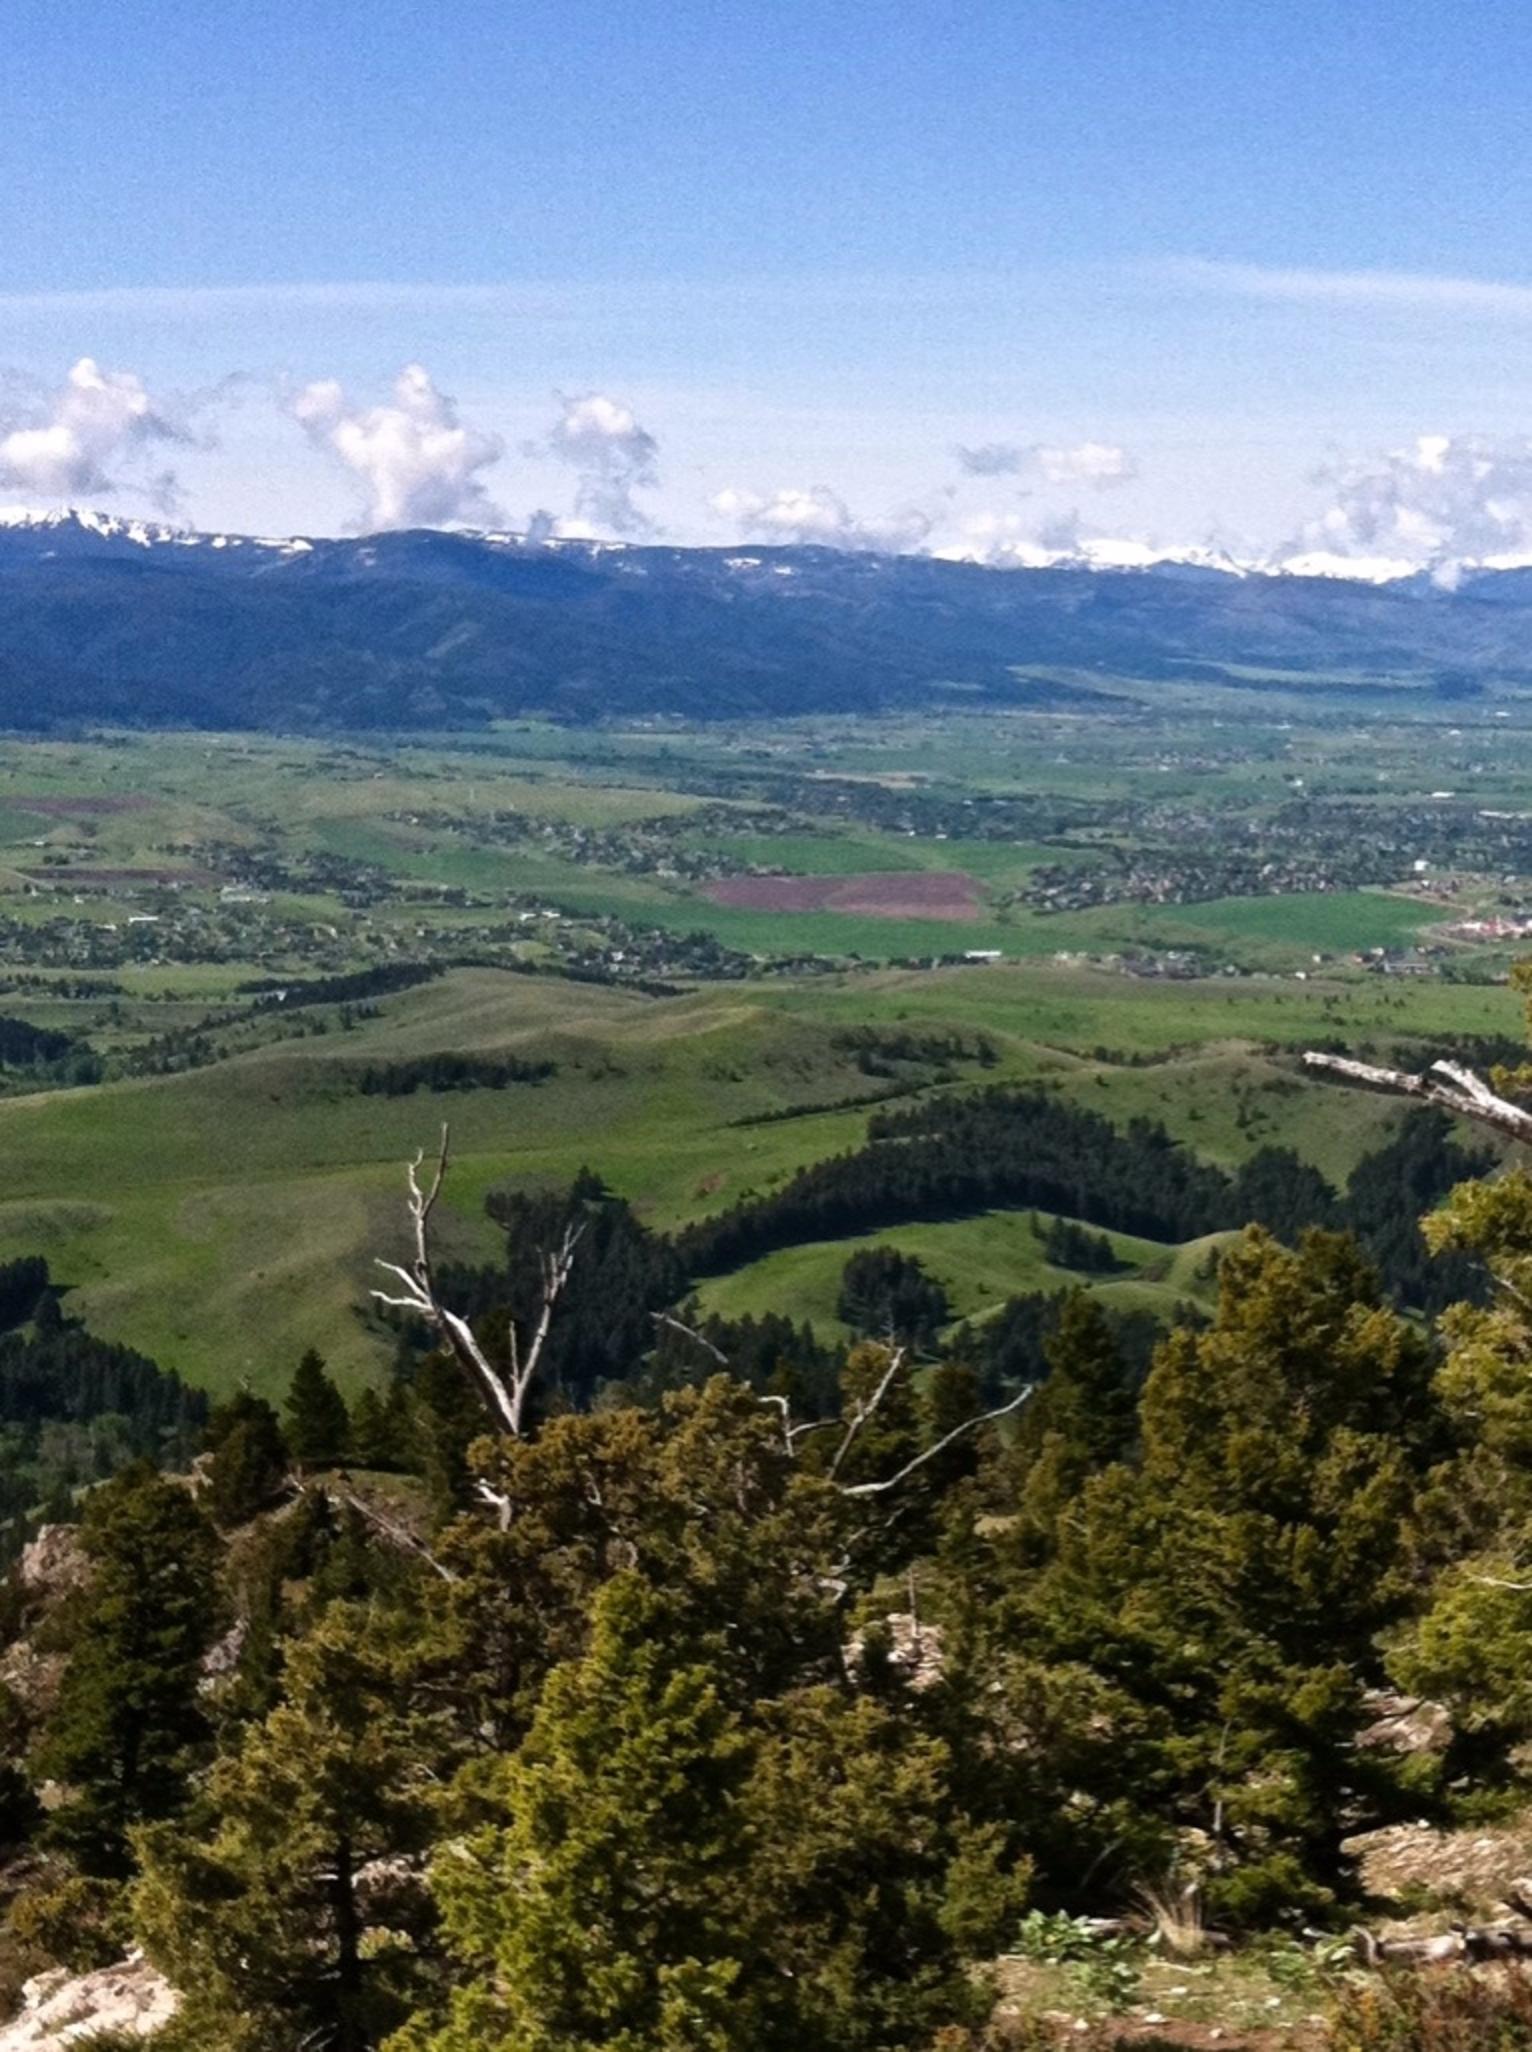 From the top of the Bridger Mountains, the Gallatins rise in the distance at the south end of Bozeman. In-between those ranges, sprawling development is rapidly filling in, one harbinger of how wildlands and wildlife are going to face increasing human pressure in the future. Photo by Todd Wilkinson